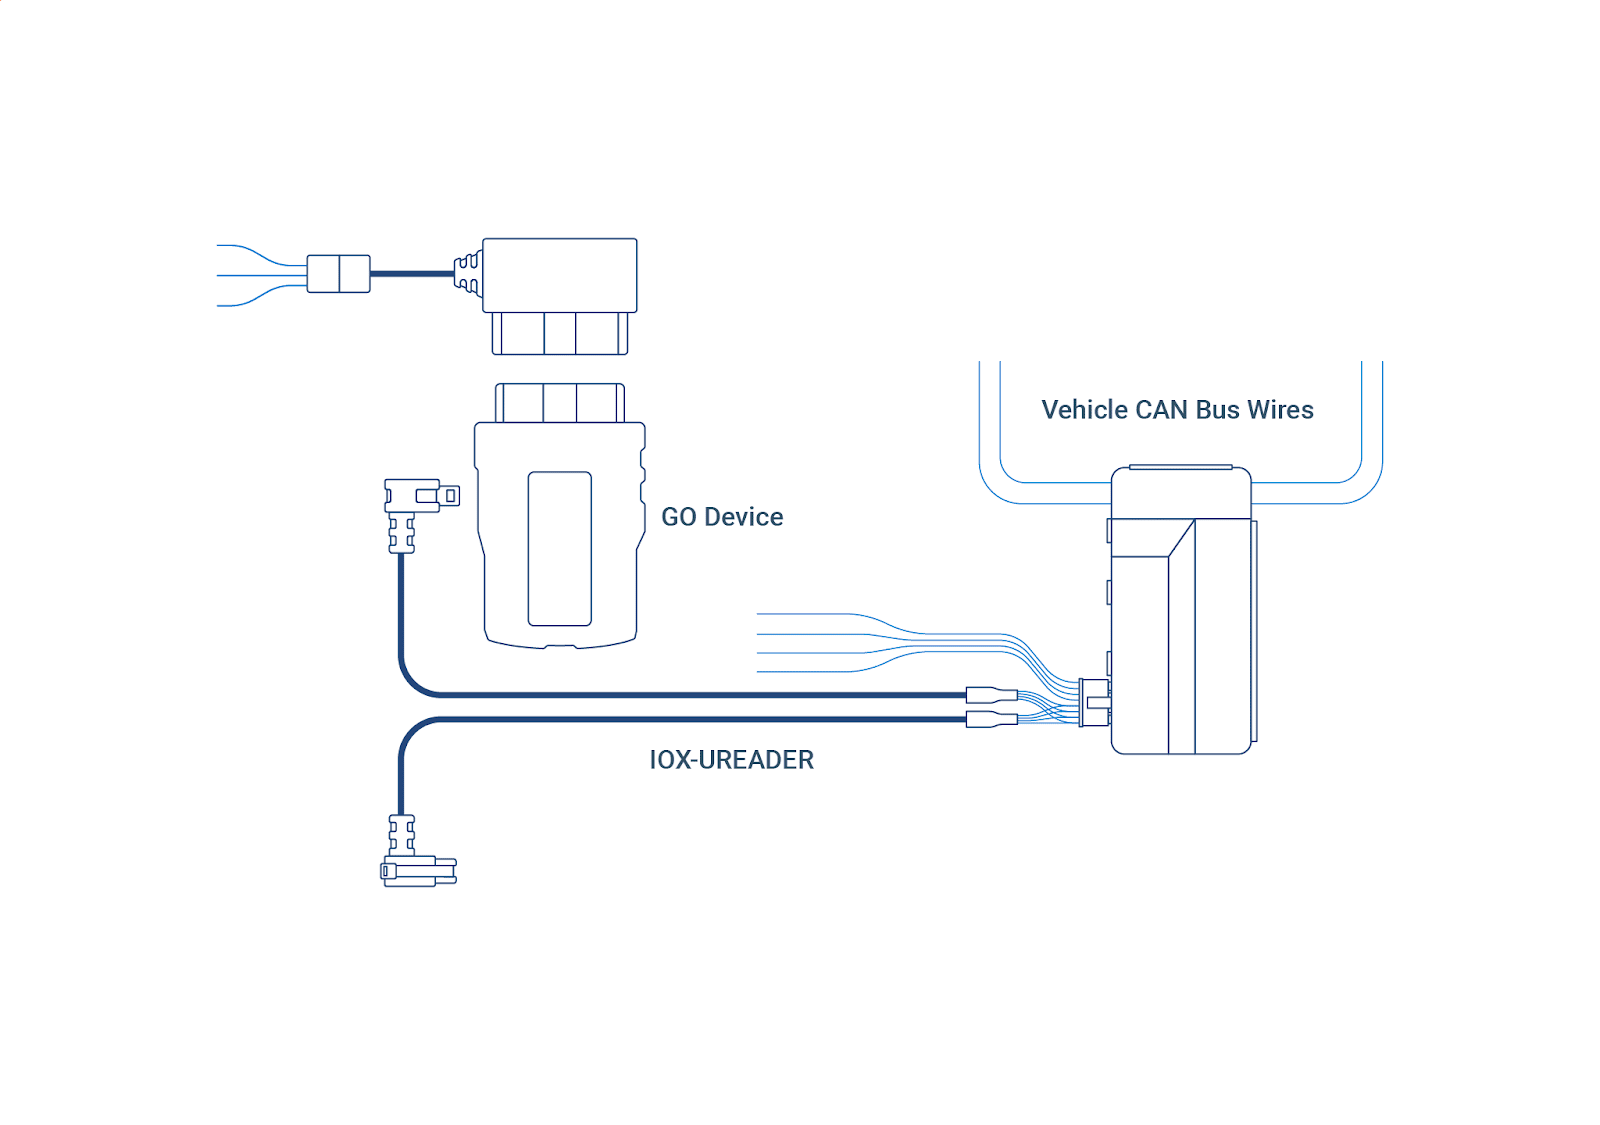 Diagram of connection between GO device, CAN Bus, and IOX-UREADER